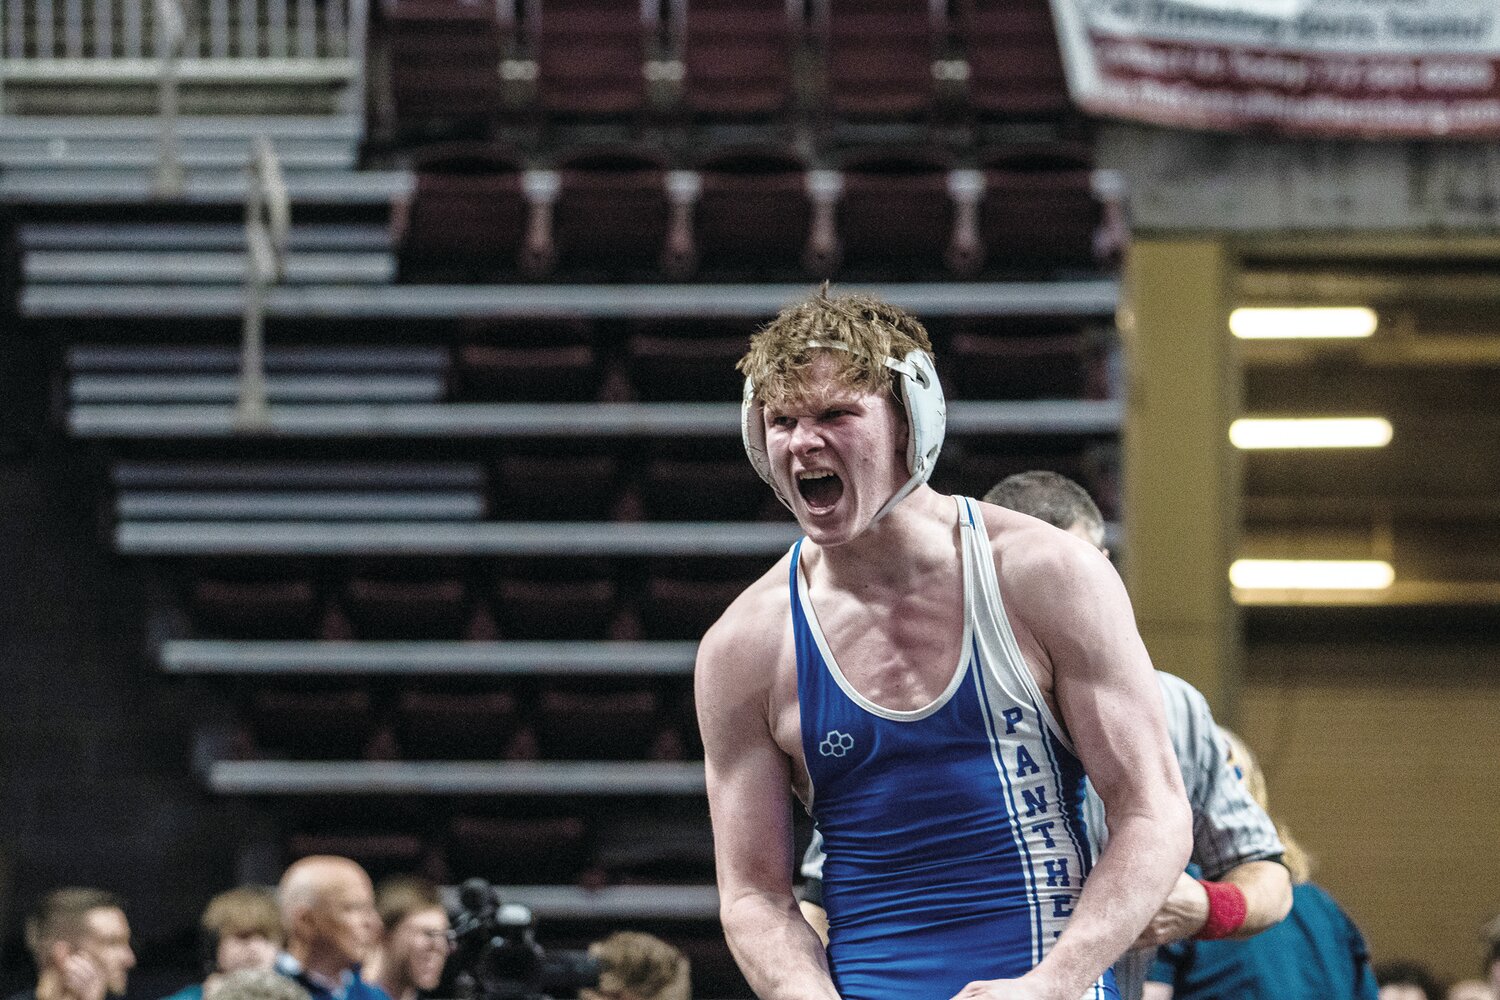 Quakertown’s Gavin Carroll finished fifth in the 145-pound class of the PIAA 3A tournament.